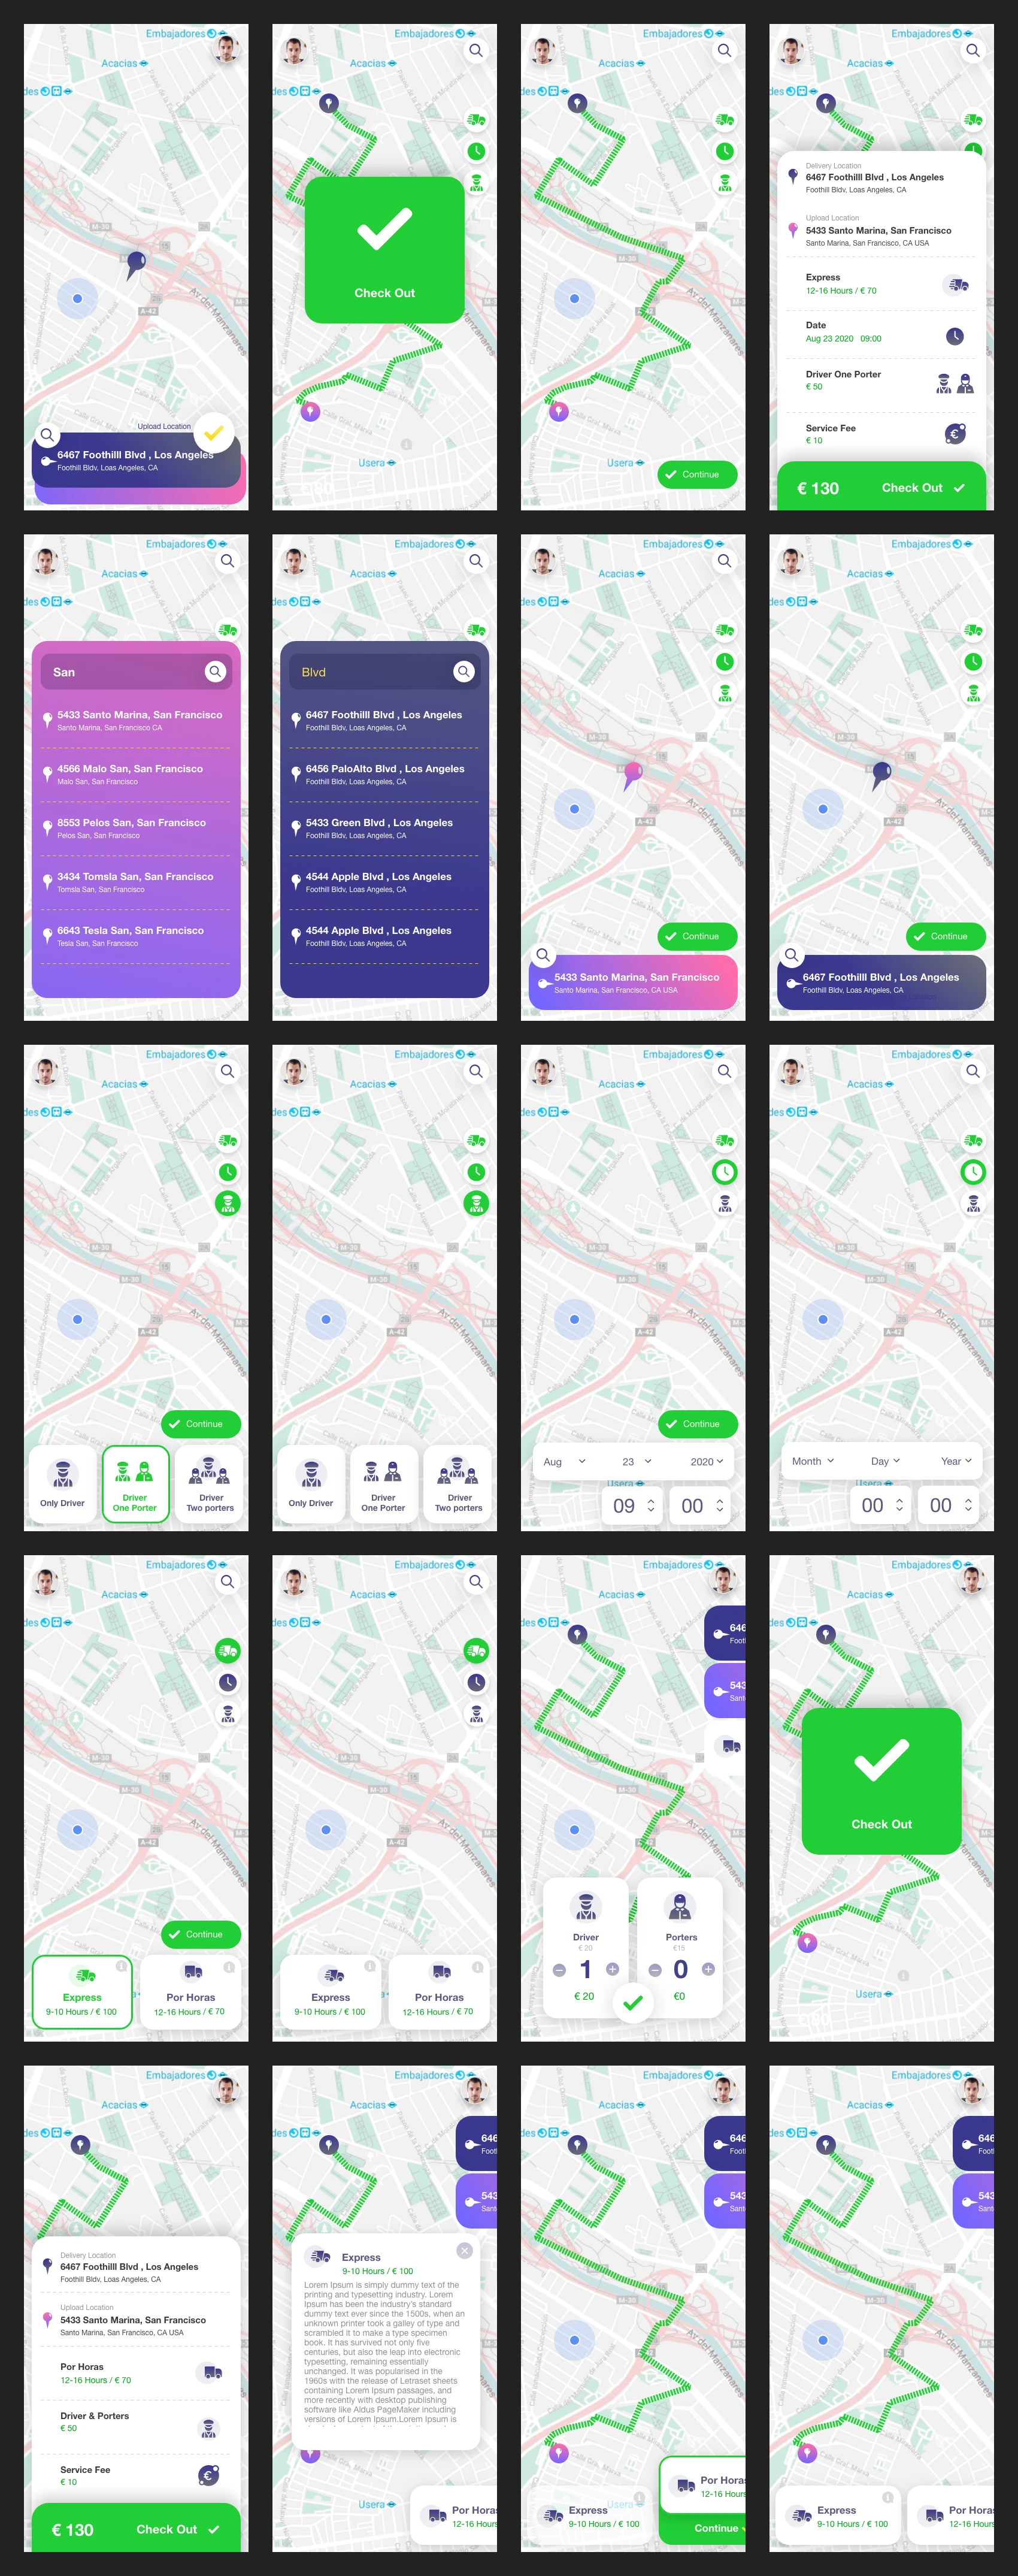 Delivery Truck App Free UI Kit for Adobe XD - Delivery Truck App is free mobile UI Kit designed exclusively for Adobe XD. It features 25+ mobile screen pages to get you started on your projects.